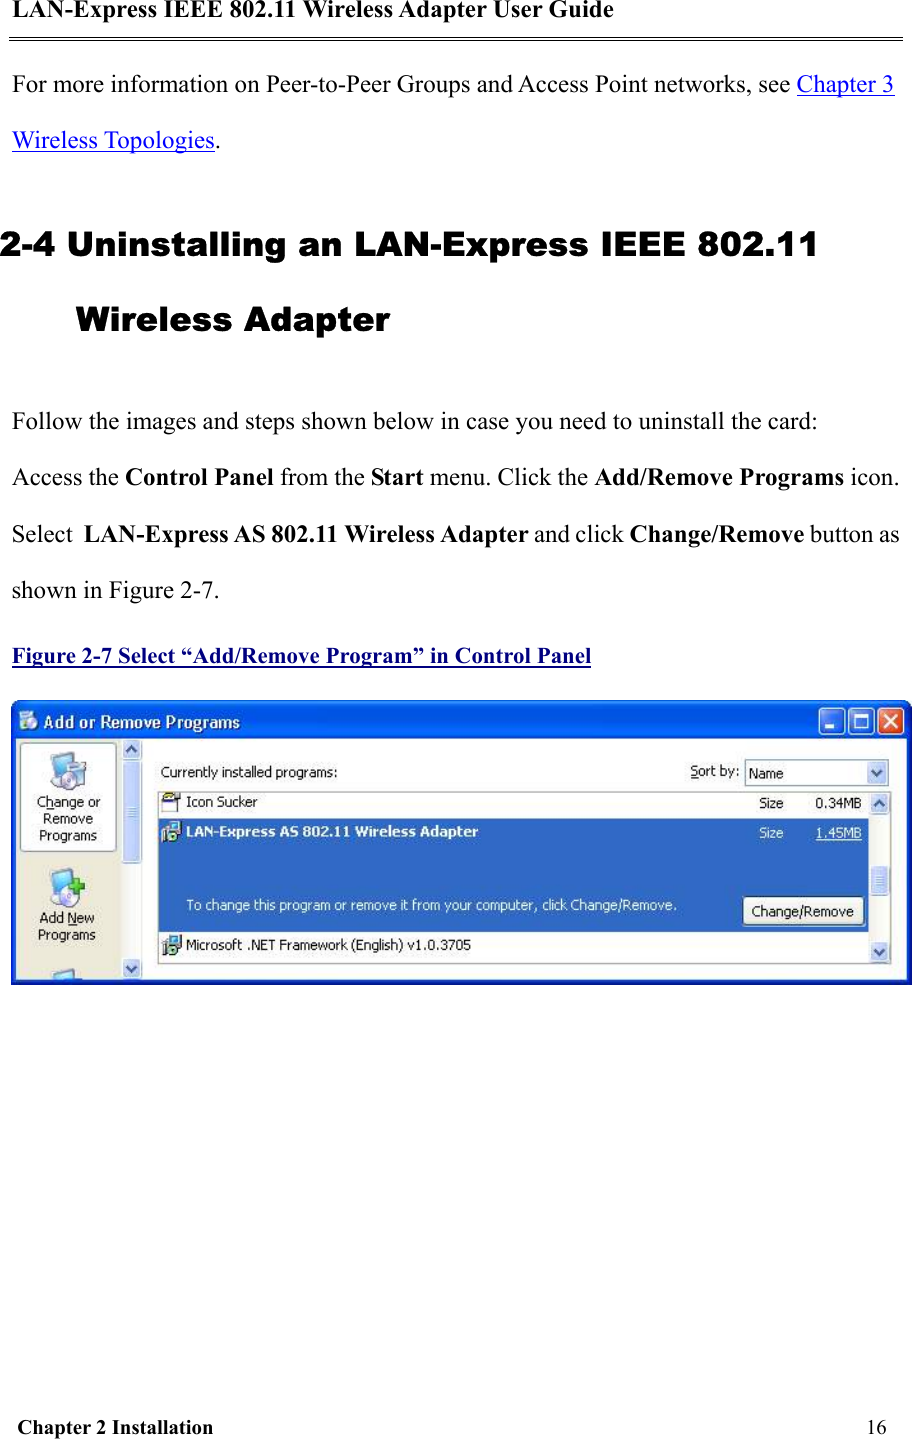 LAN-Express IEEE 802.11 Wireless Adapter User Guide  Chapter 2 Installation     16     For more information on Peer-to-Peer Groups and Access Point networks, see Chapter 3 Wireless Topologies. 2-4 Uninstalling an LAN-Express IEEE 802.11 Wireless Adapter Follow the images and steps shown below in case you need to uninstall the card: Access the Control Panel from the Start menu. Click the Add/Remove Programs icon. Select  LAN-Express AS 802.11 Wireless Adapter and click Change/Remove button as shown in Figure 2-7. Figure 2-7 Select “Add/Remove Program” in Control Panel  